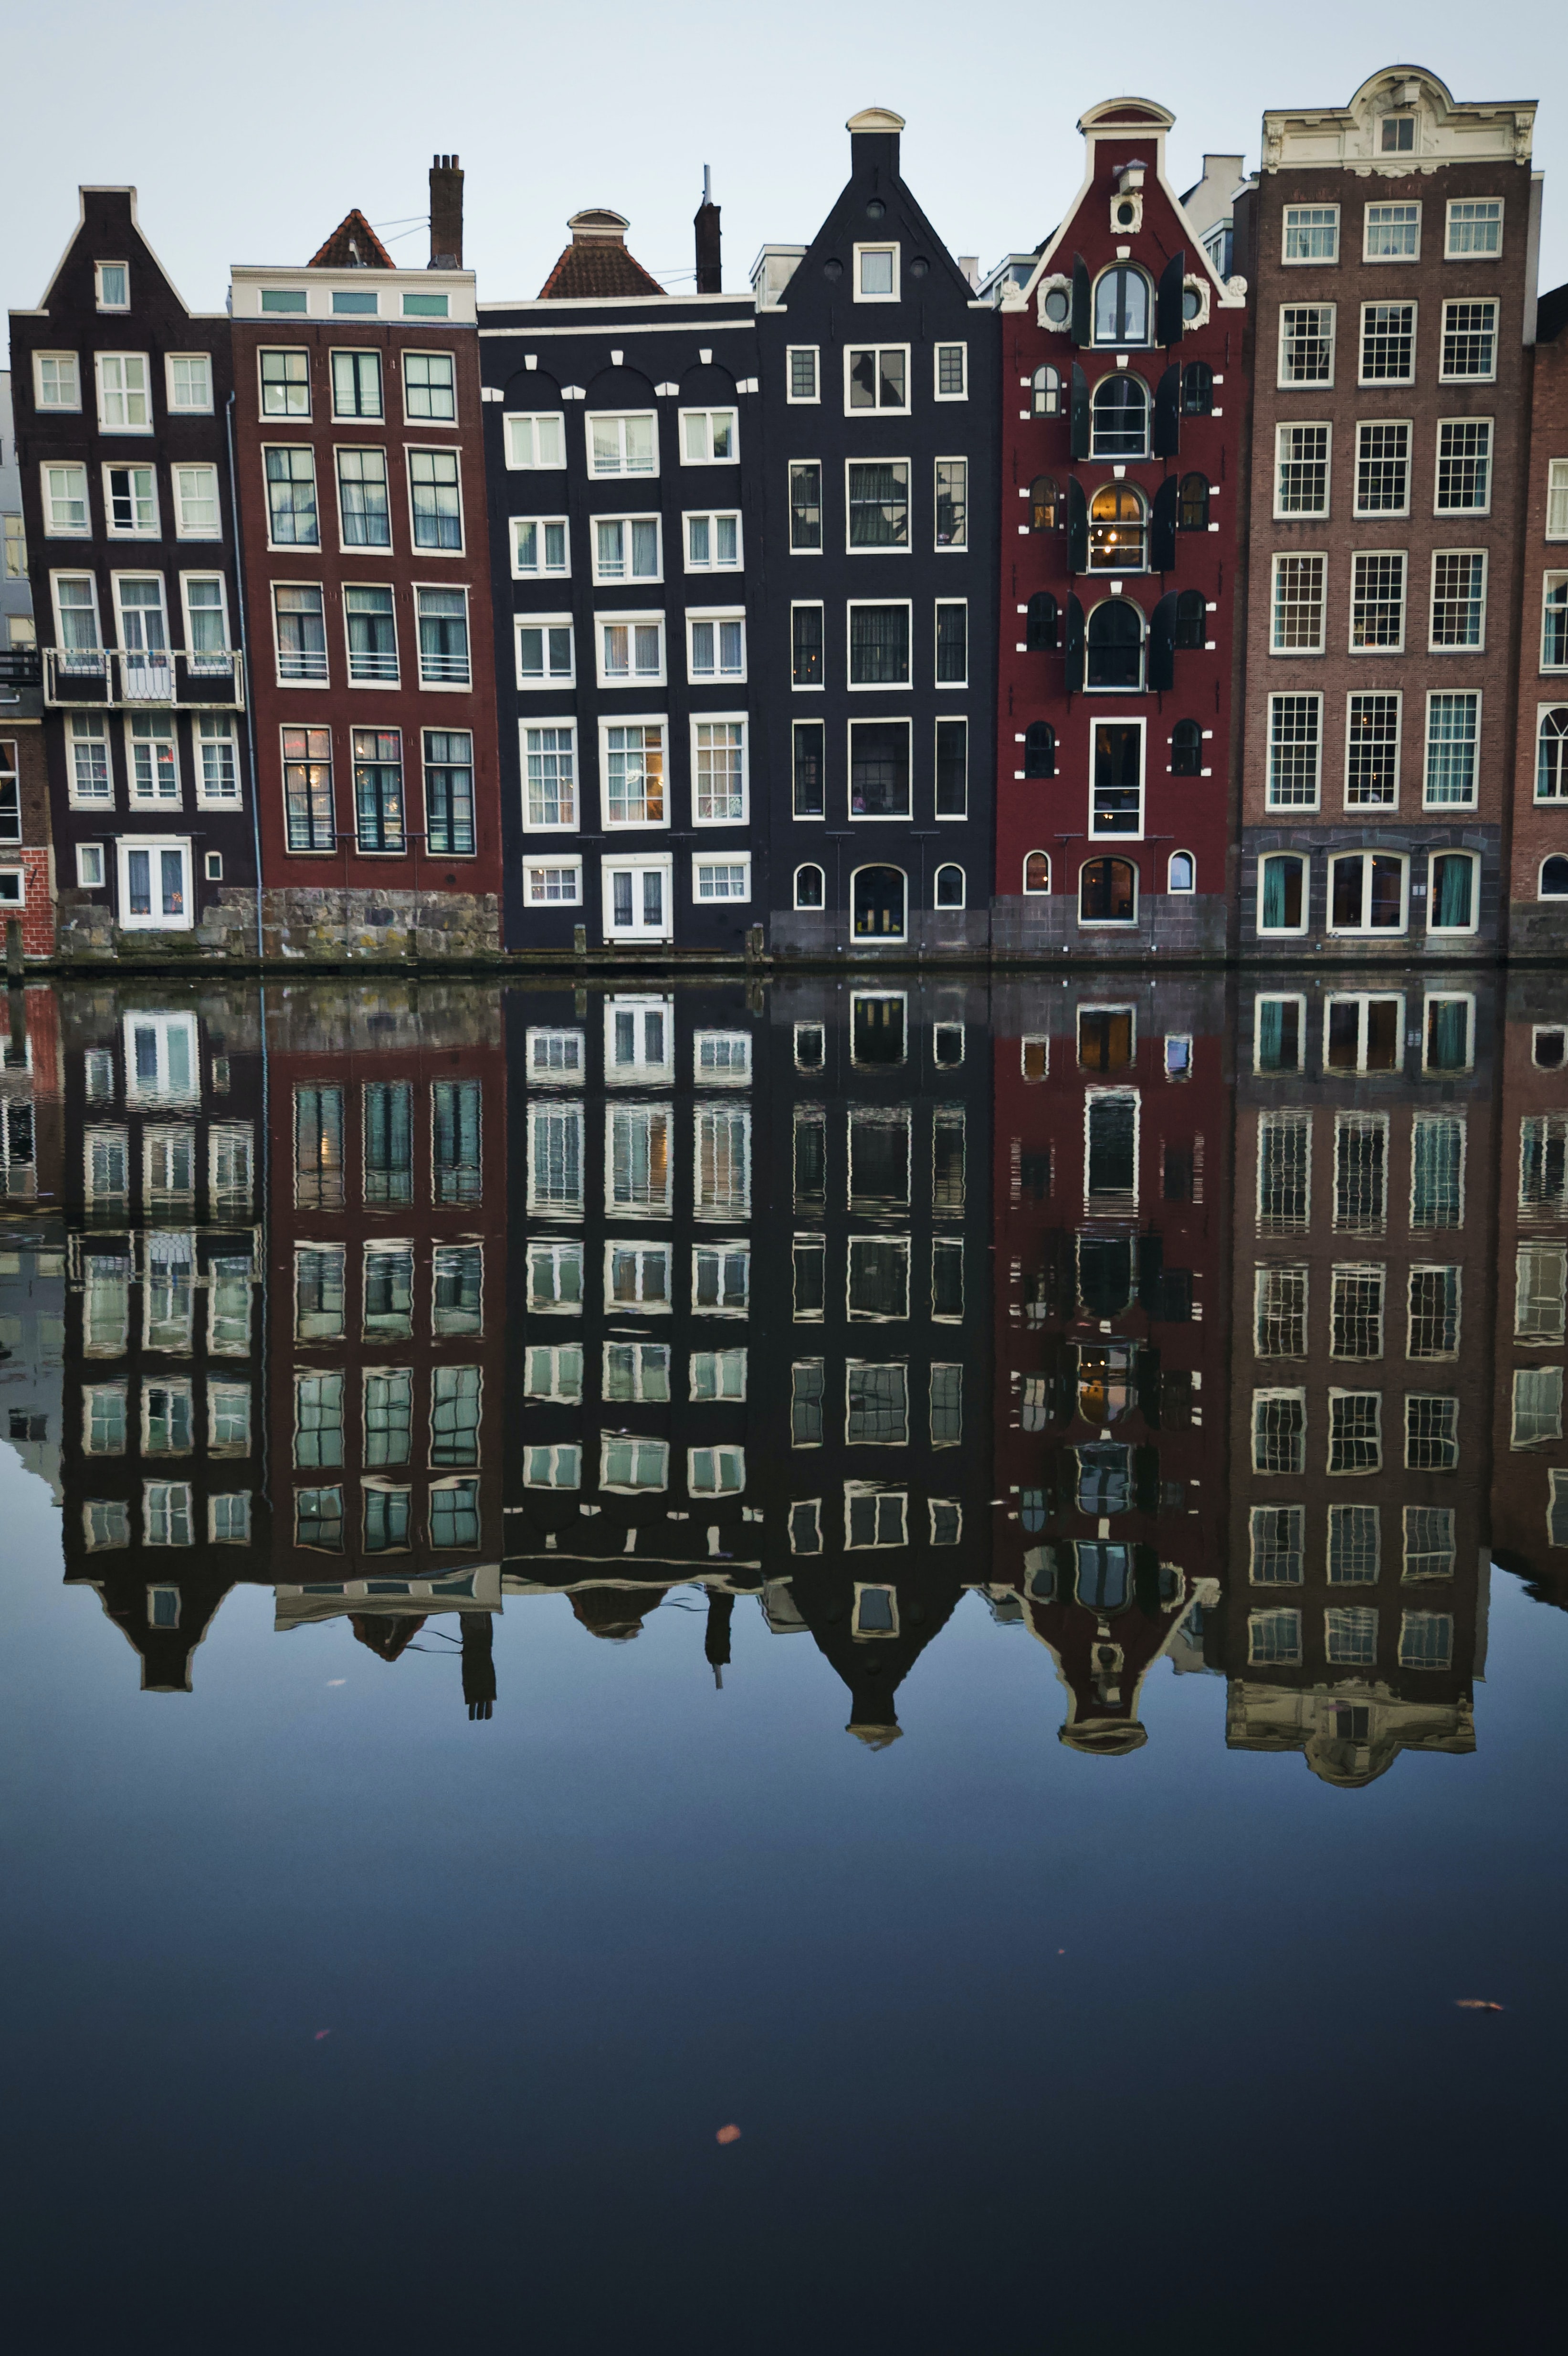 1920x1080 Background cities, water, houses, architecture, building, reflection